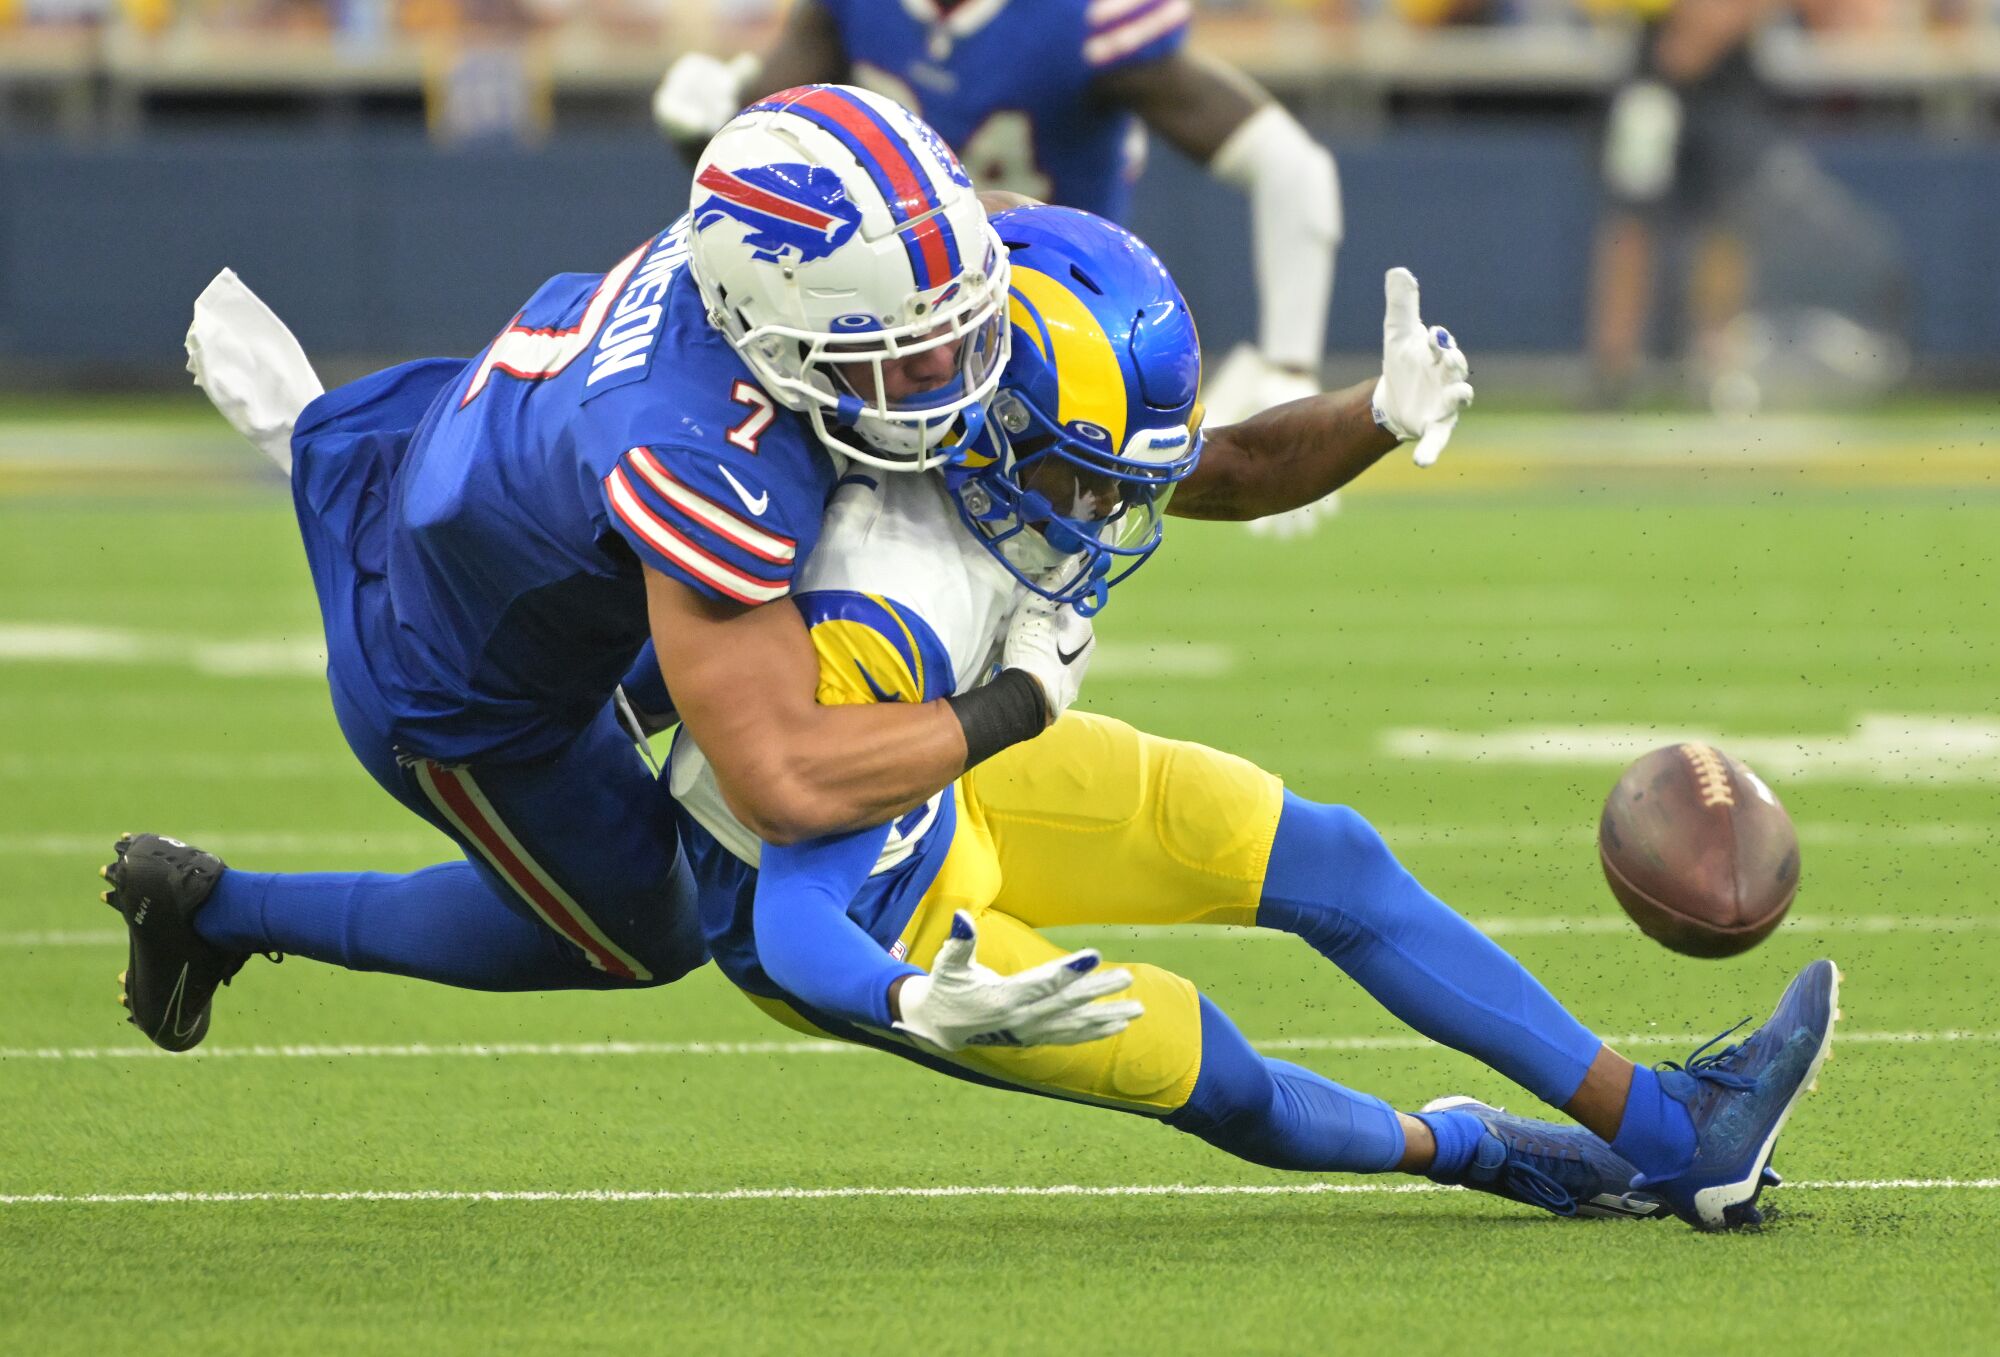 Rams receiver TuTu Atwell can't hold on to the ball while trying to make a catch as Bills cornerback Aaron Jonson defends.